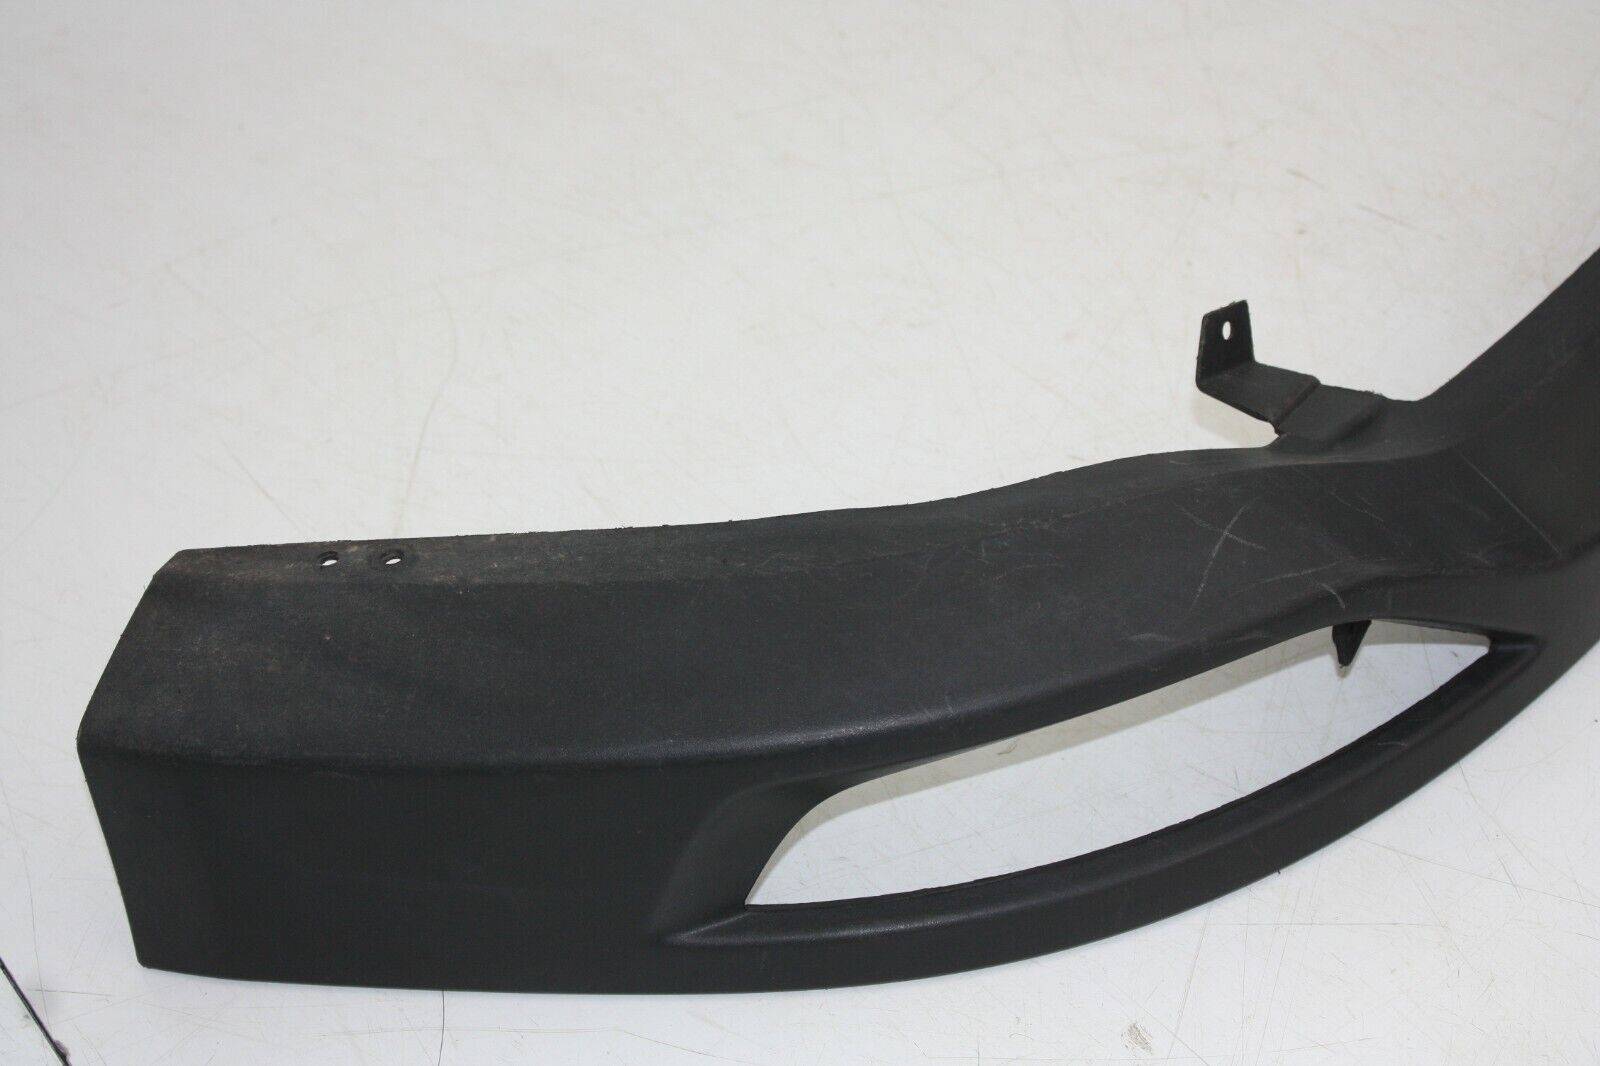 Ford-C-Max-Rear-Bumper-Lower-Section-2010-TO-2015-AM51-R17A894-A-Genuine-175367537489-6